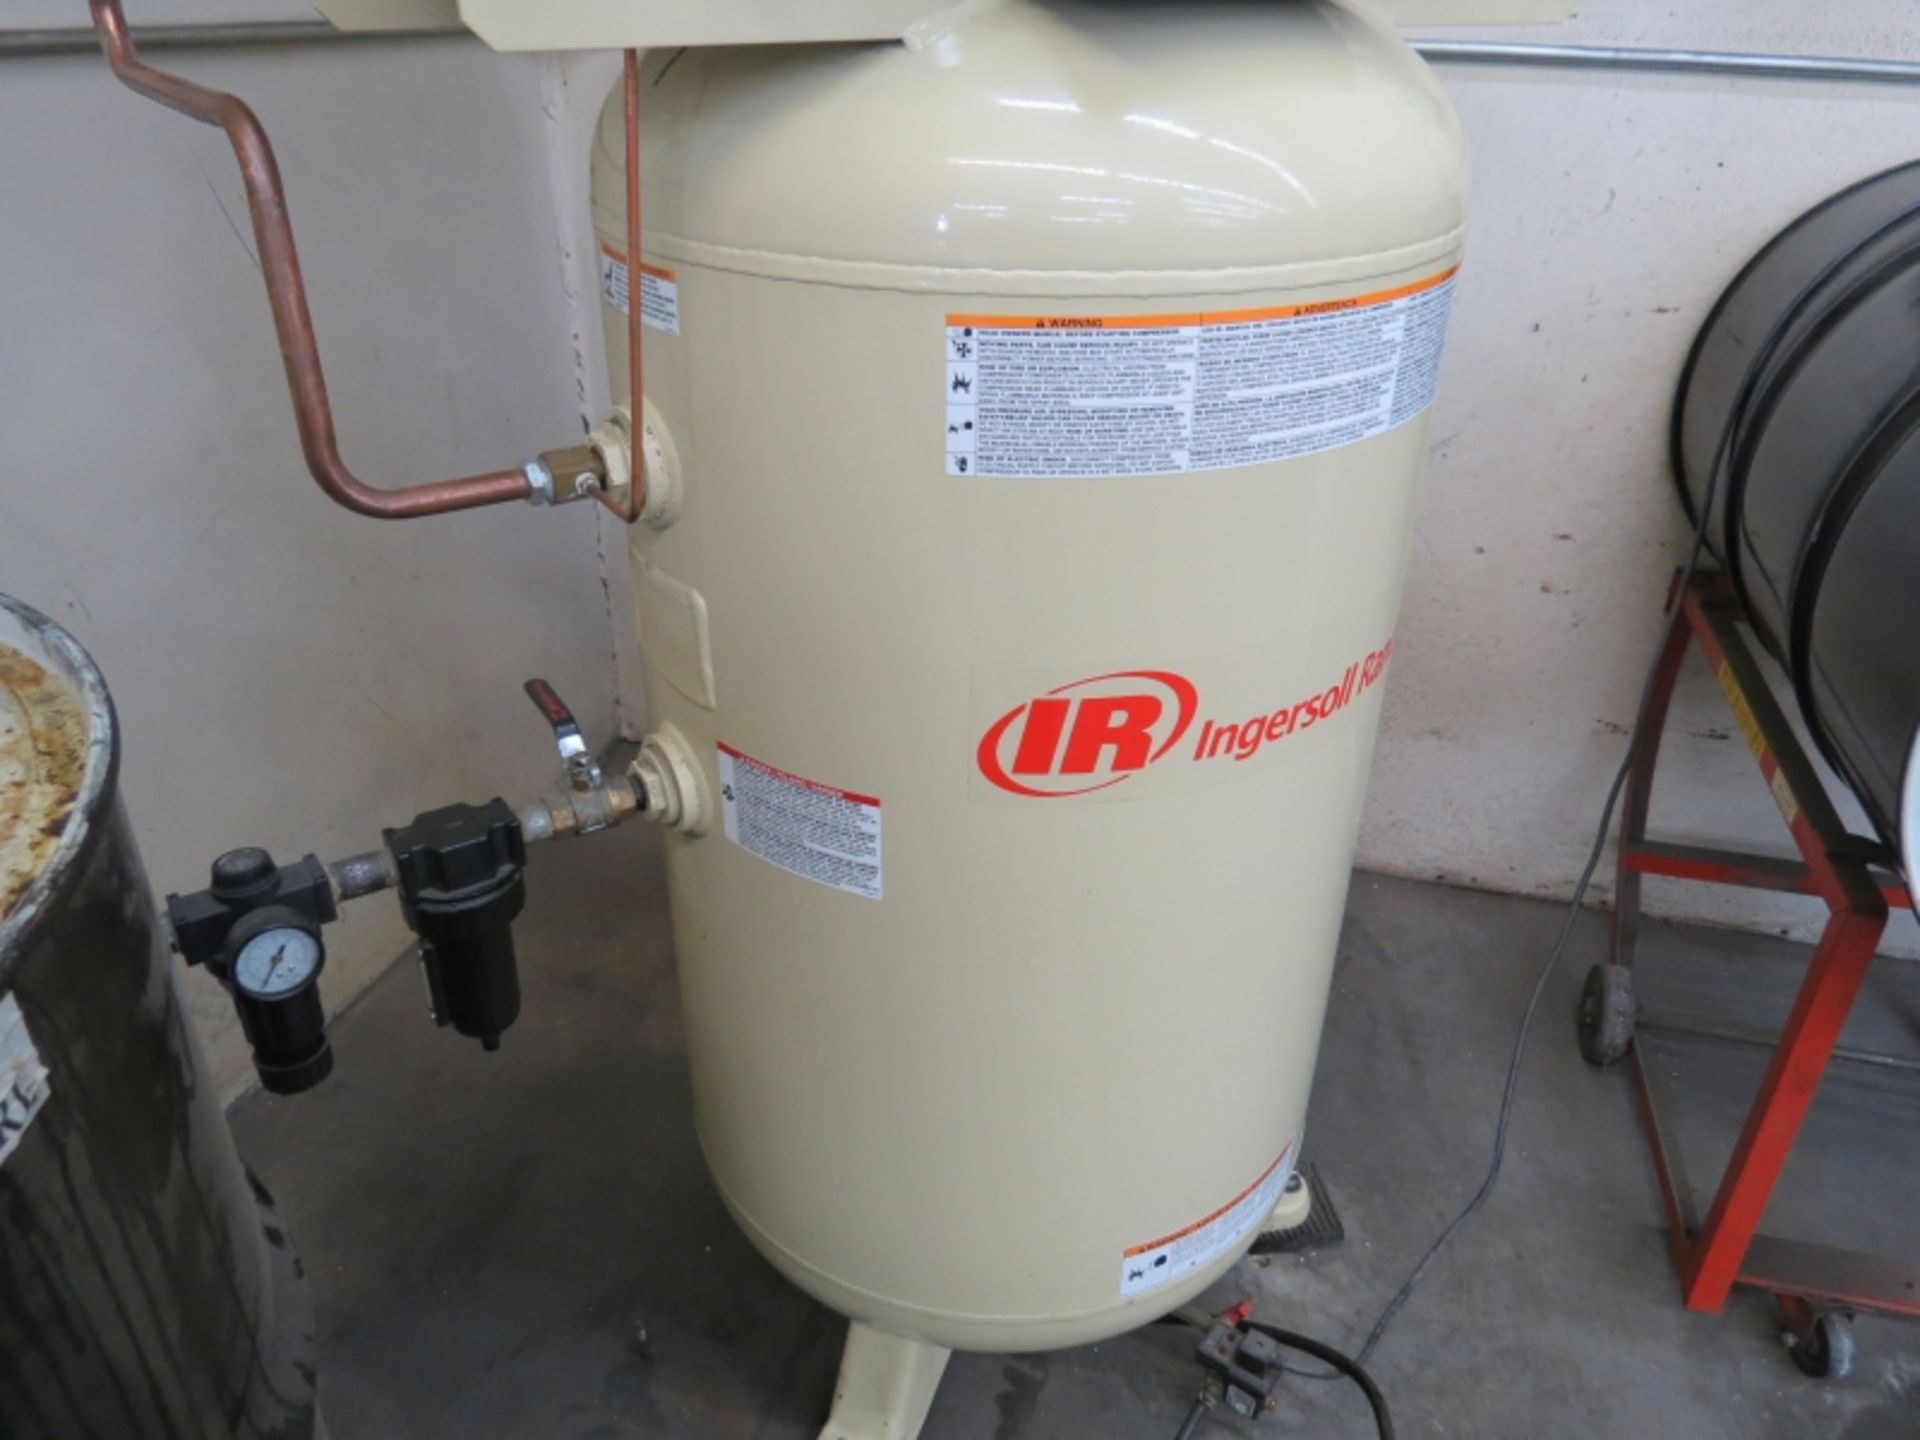 Ingersoll Rand 2475 Air Compressor, S/N NAR10125410 - Image 3 of 5